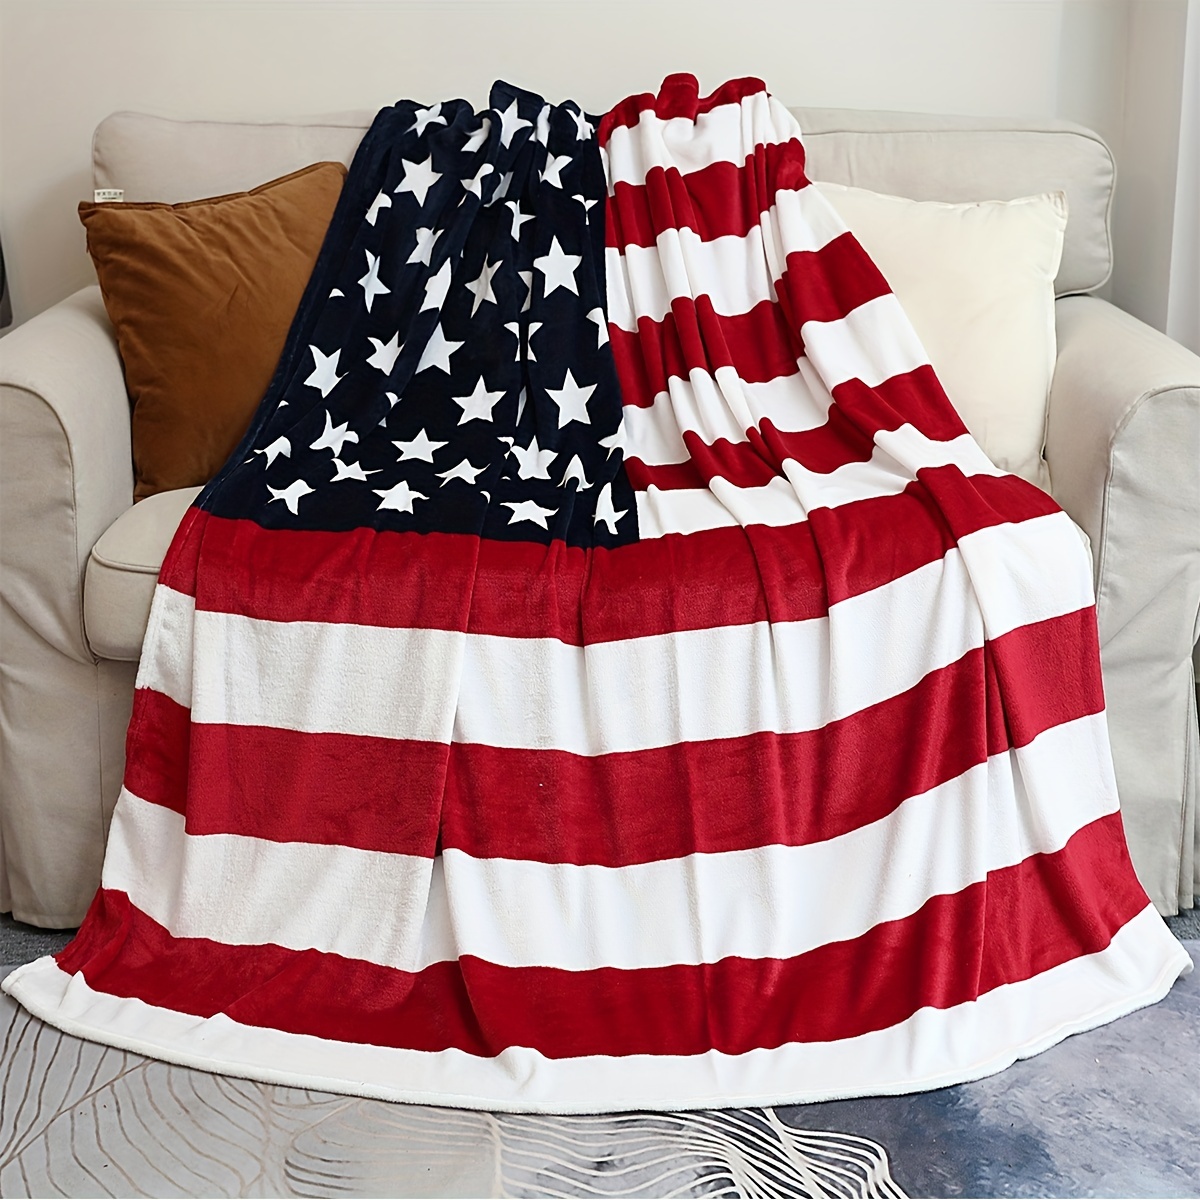 

1pc Super Soft American Flag Print Flannel Blanket - Perfect For Bed, Couch, Chair, Camping, Living Room, Office, And Gift Giving - Multi-purpose Holiday Gift